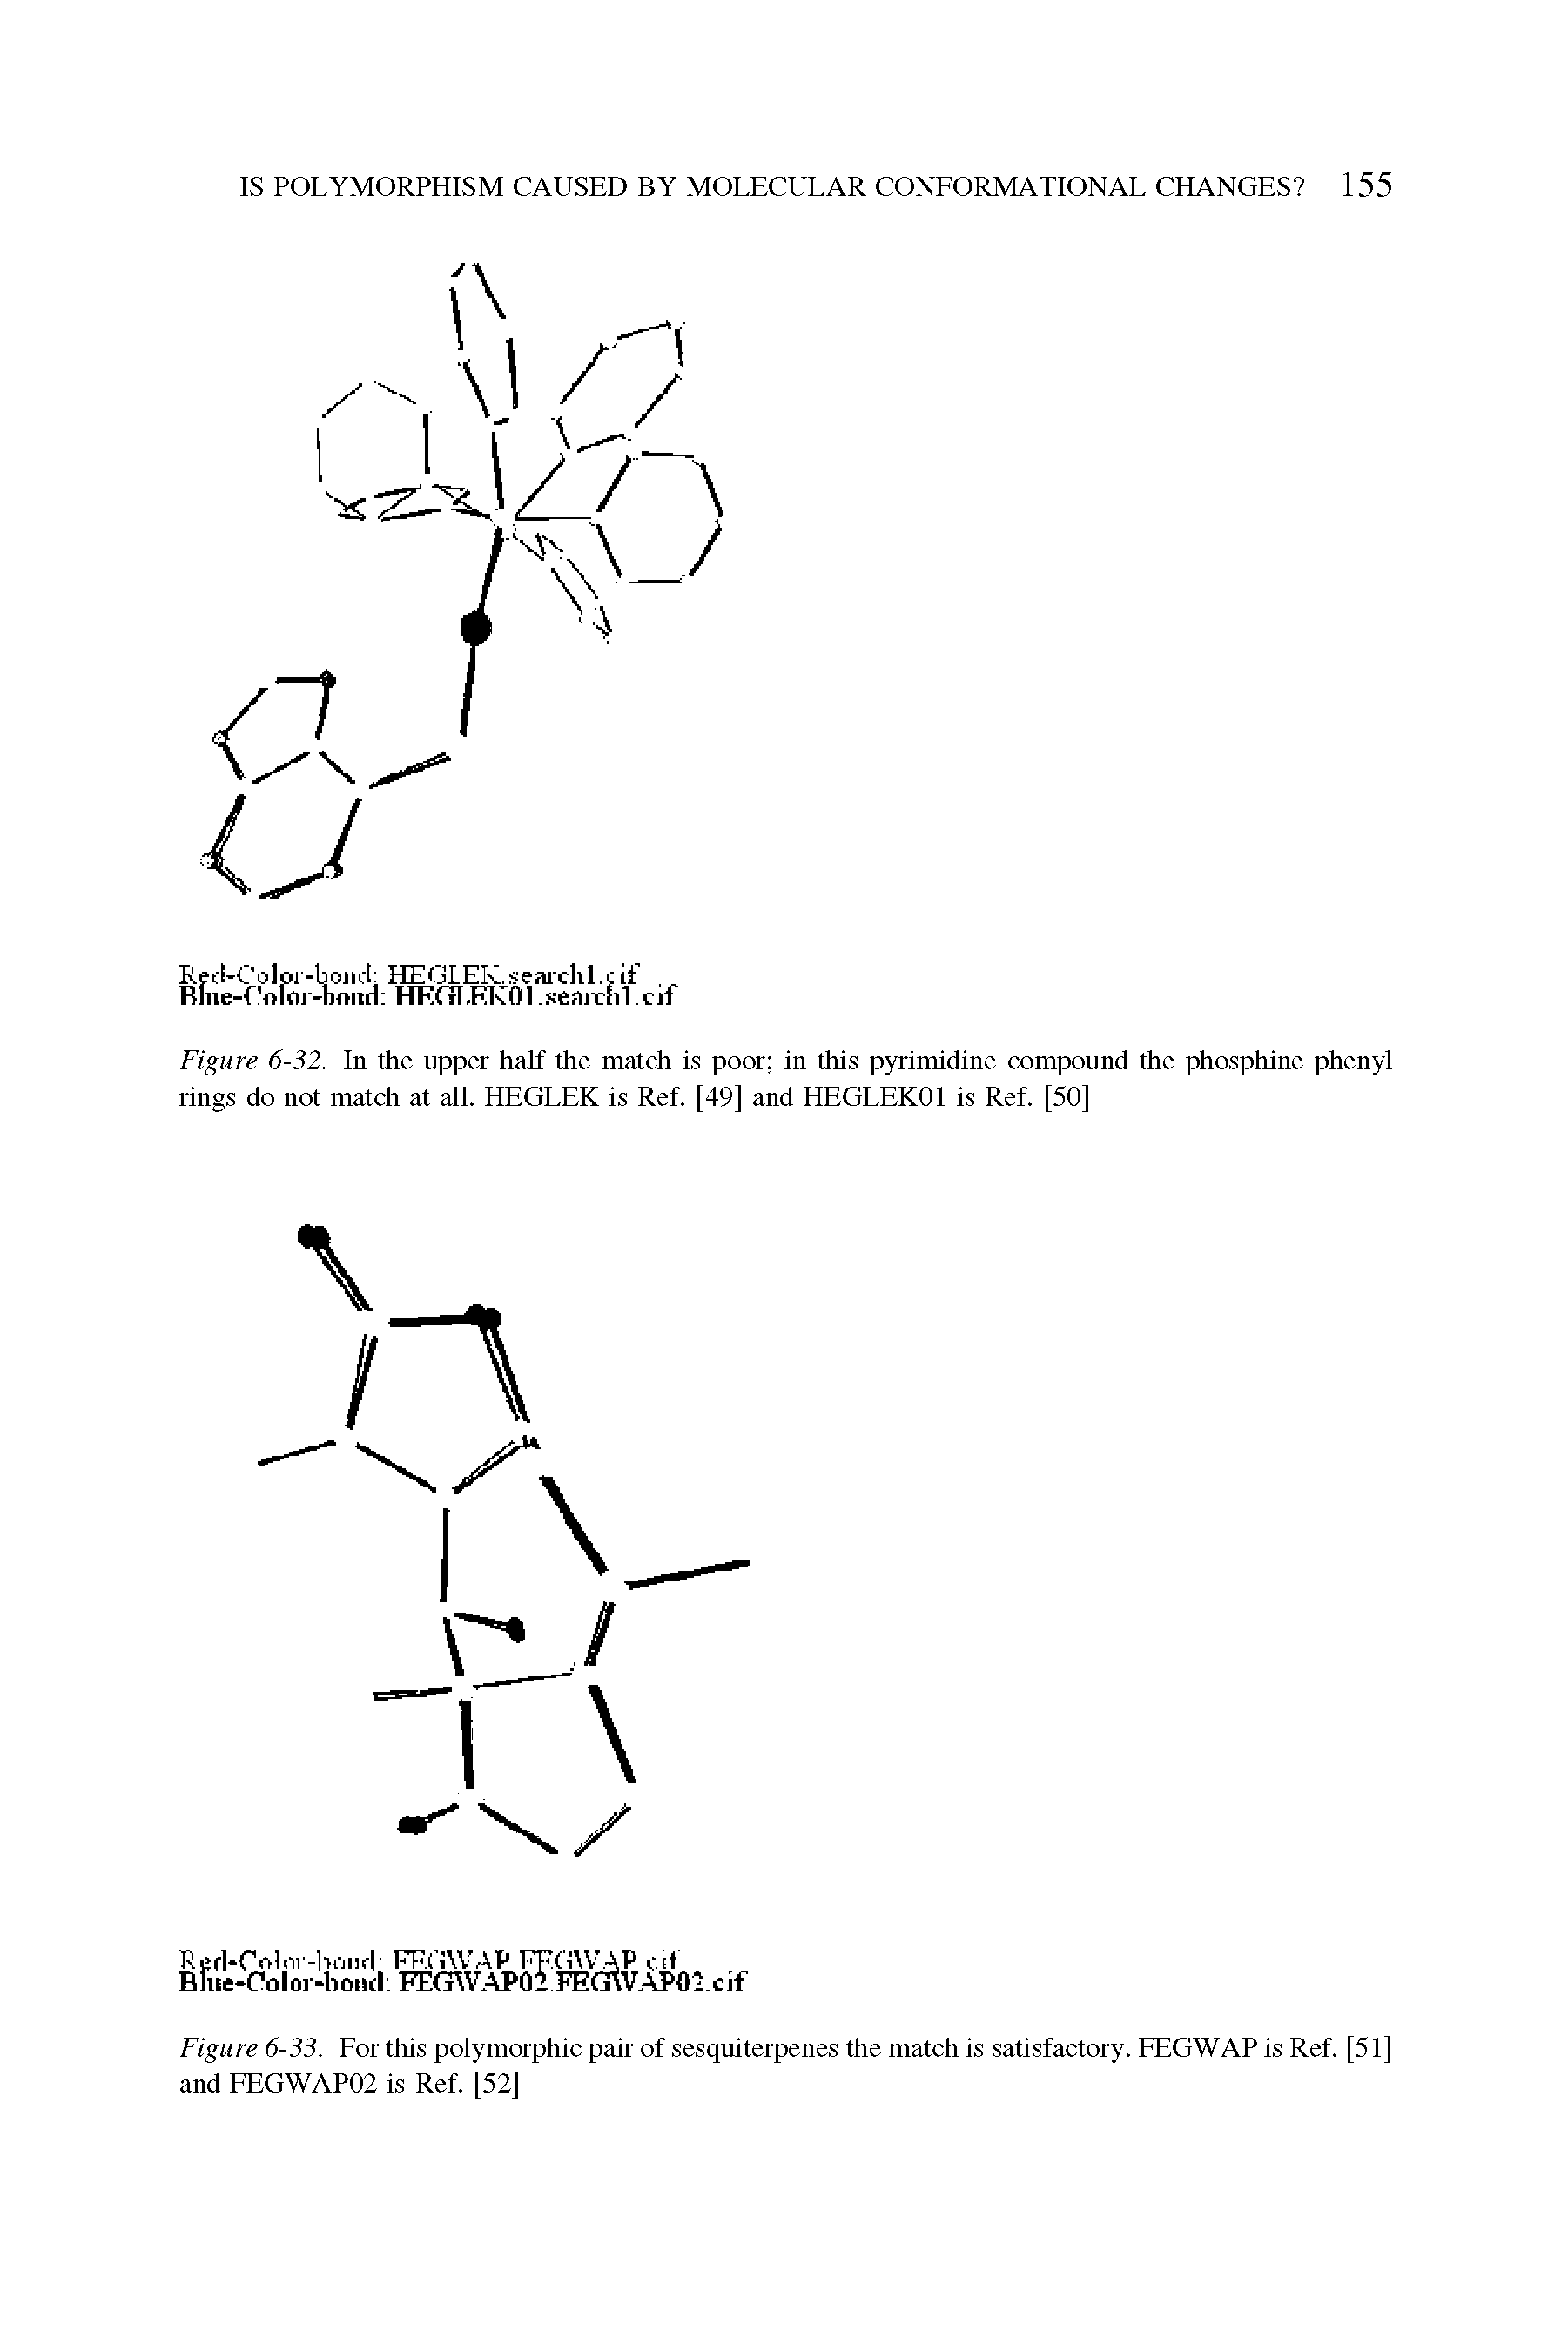 Figure 6-32. In the upper half the match is poor in this pyrimidine compound the phosphine phenyl rings do not match at all. HEGLEK is Ref. [49] and HEGLEKOl is Ref. [50]...